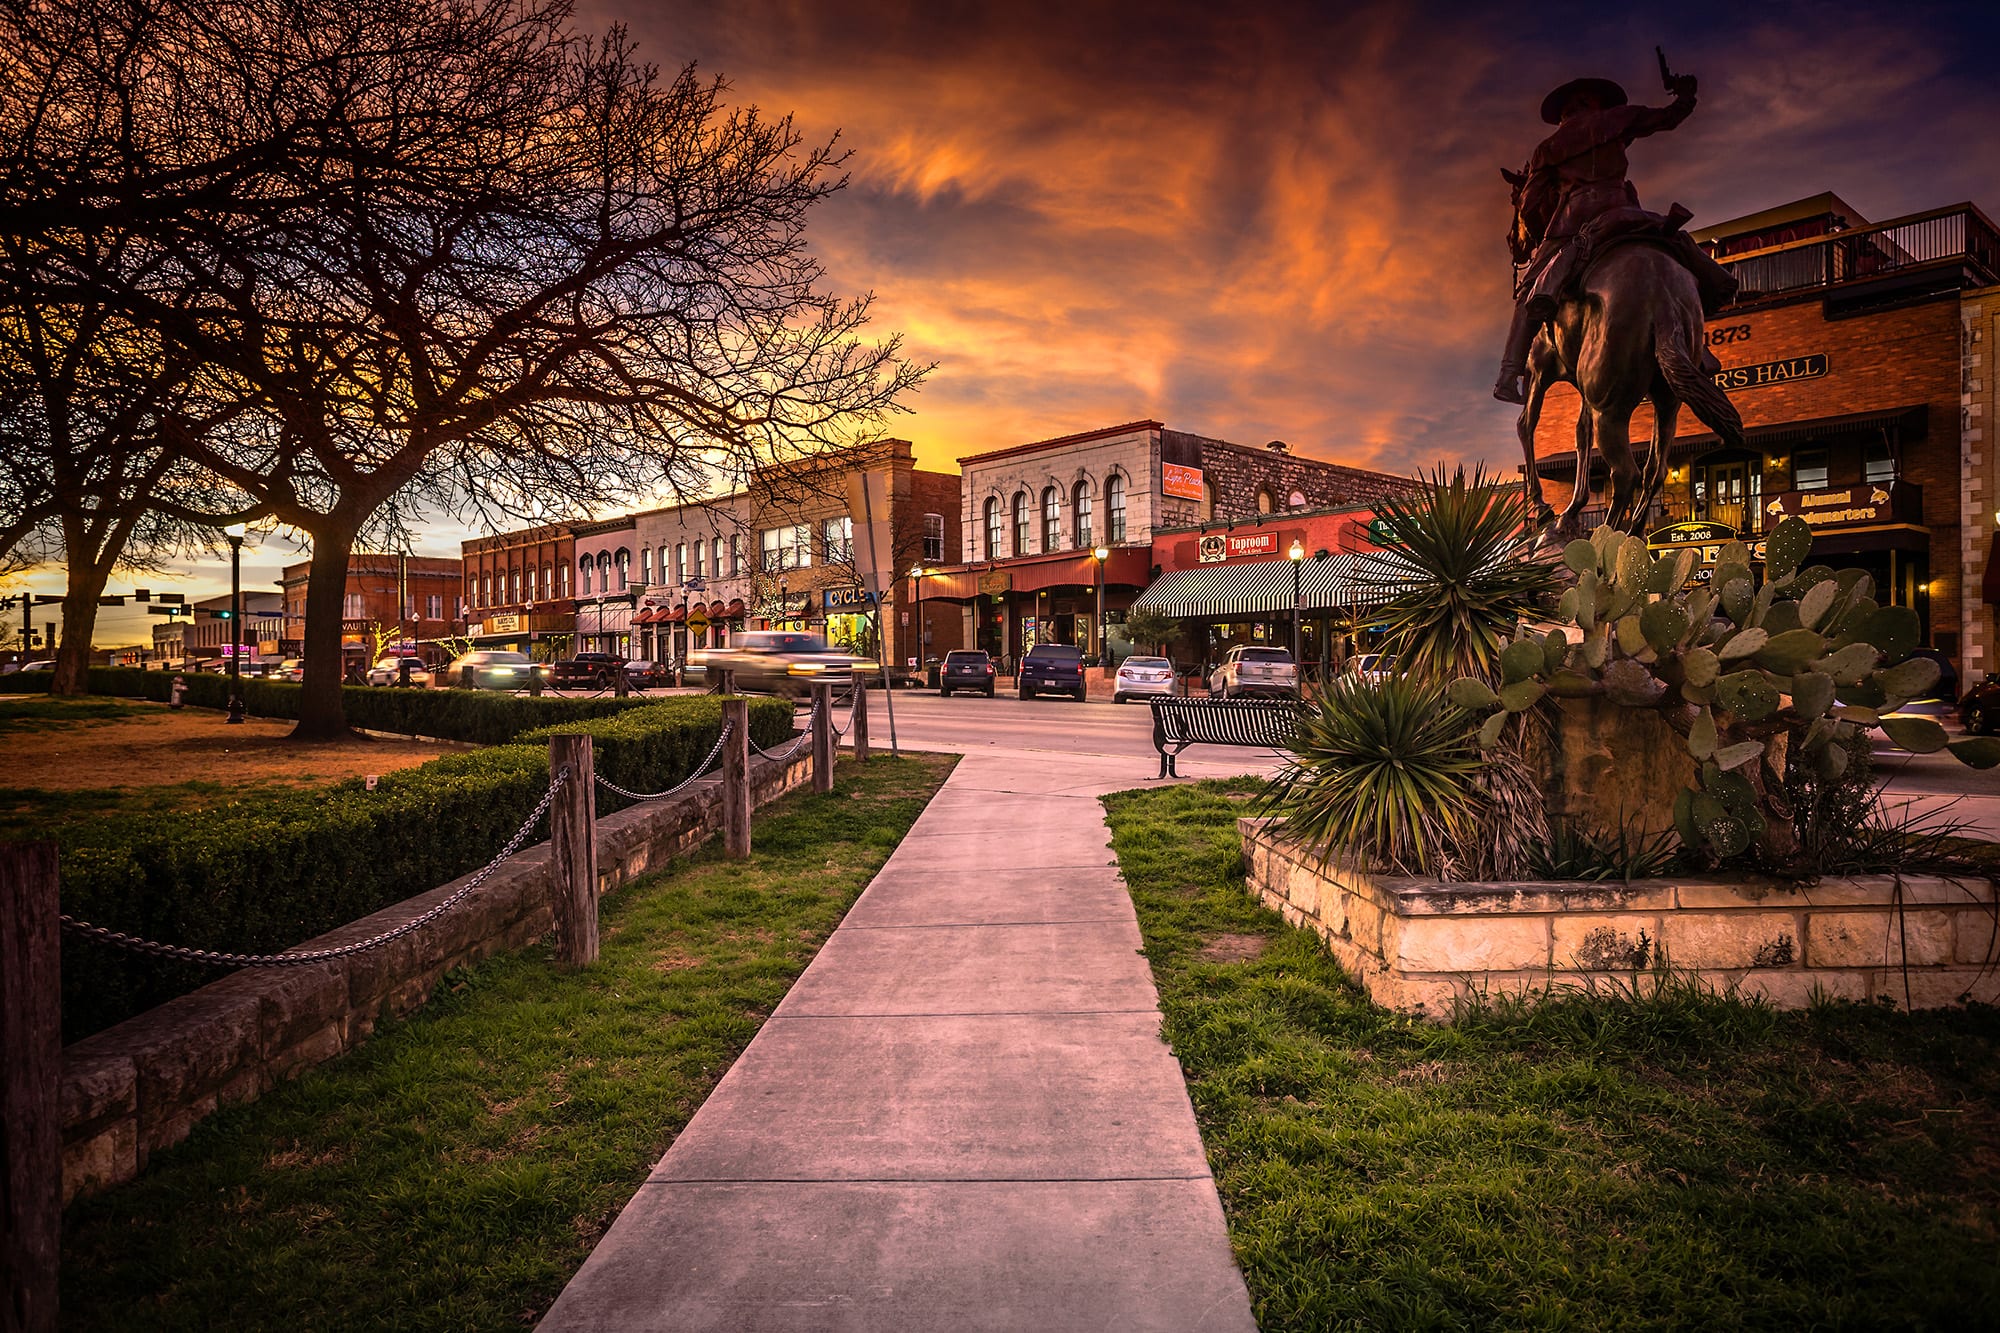 Sunset on The Square in San Marcos, Texas